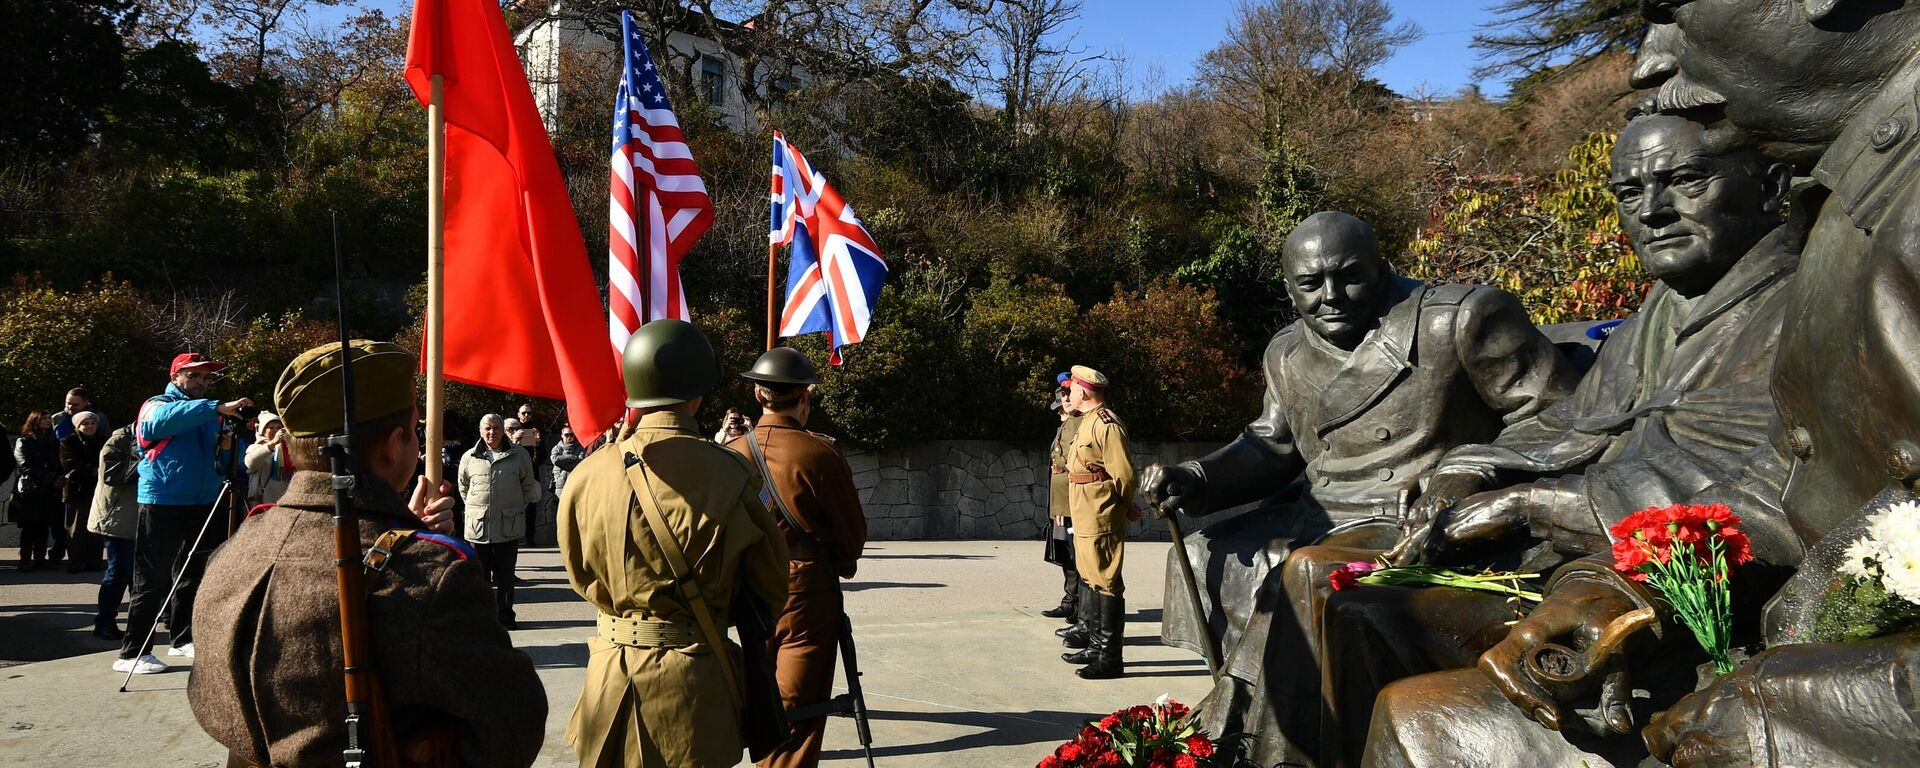 Monument in Yalta, Crimea dedicated to the famous meeting of the leaders of the Big Three Allies against Nazi Germany and the Axis Powers. February 2020. - Sputnik Africa, 1920, 09.05.2023